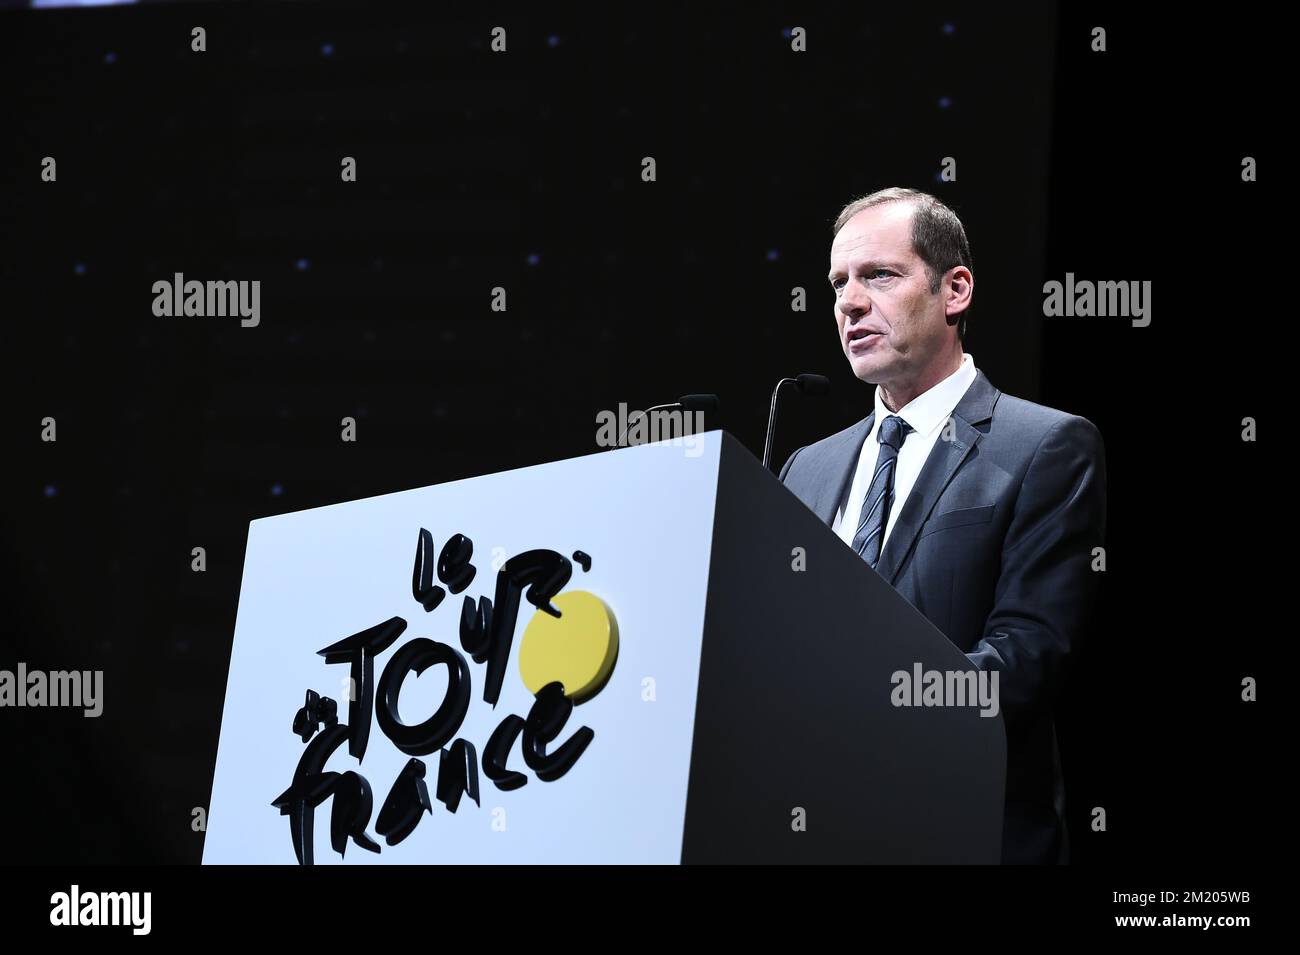 20151020 - PARIS, FRANCE: Christian Prudhomme, cycling director of ASO (Amaury Sport Organisation) pictured during the official presentation of the 2016 Tour de France route, Tuesday 20 October 2015, in Paris, France. BELGA PHOTO FRED PORCU Stock Photo